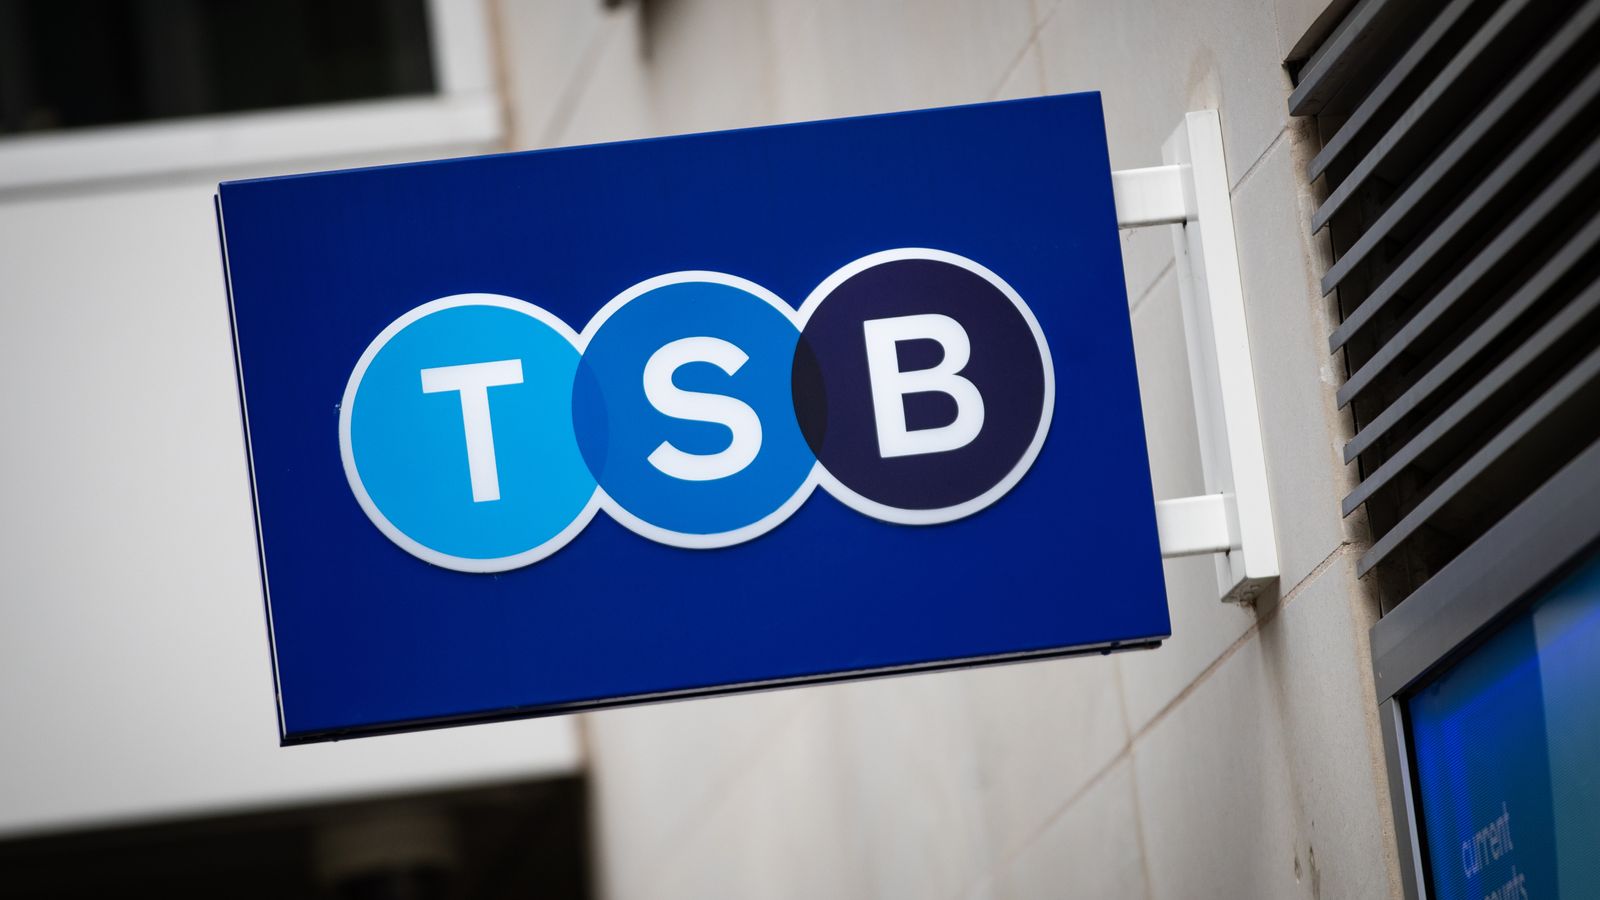 TSB to shut 36 branches and cut hundreds of jobs as full list of closures announced